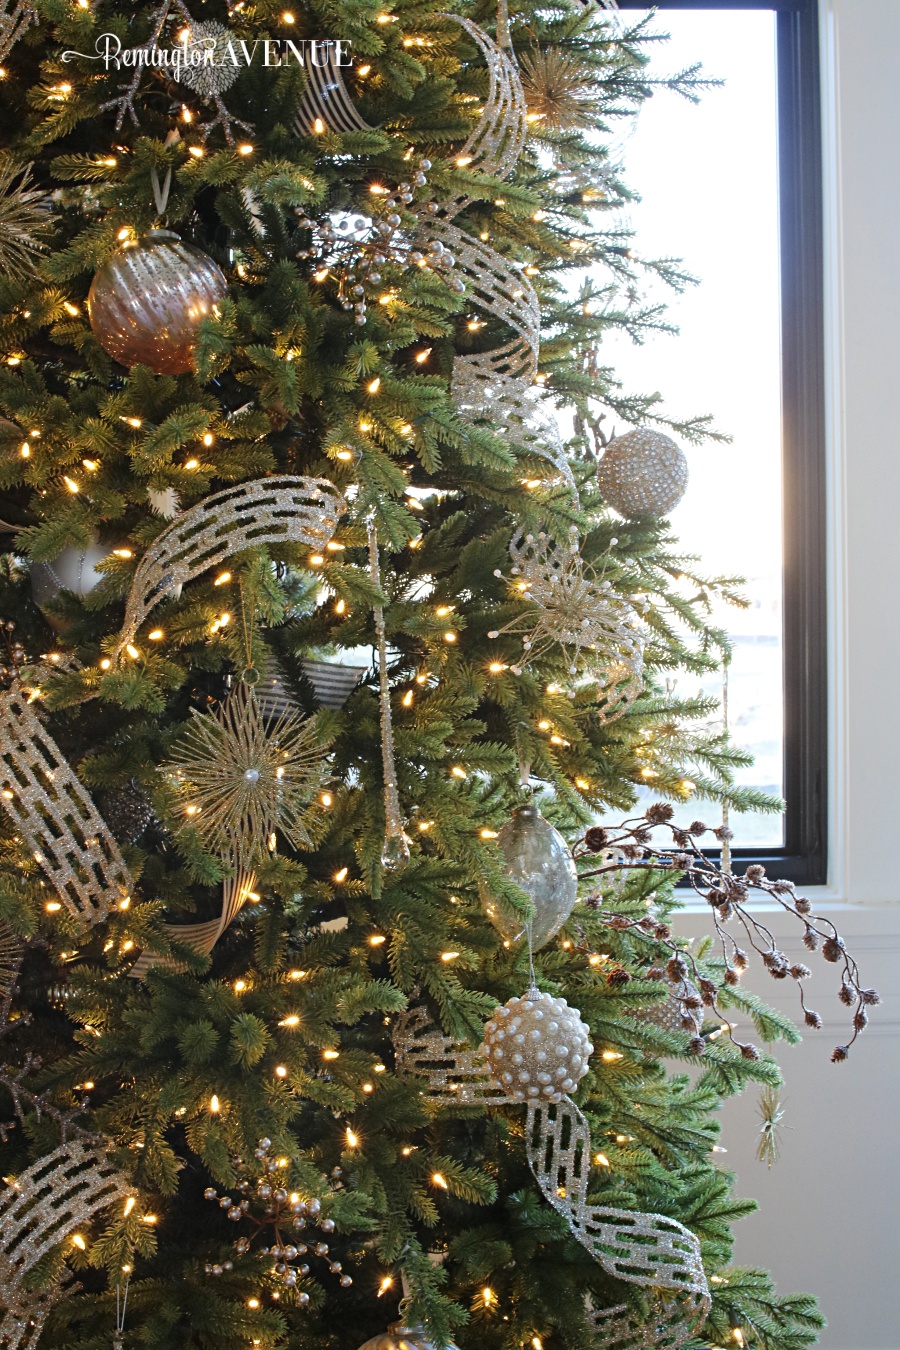 12 Bloggers of Christmas with Balsam Hill - A Metallic and Glass Christmas Tree